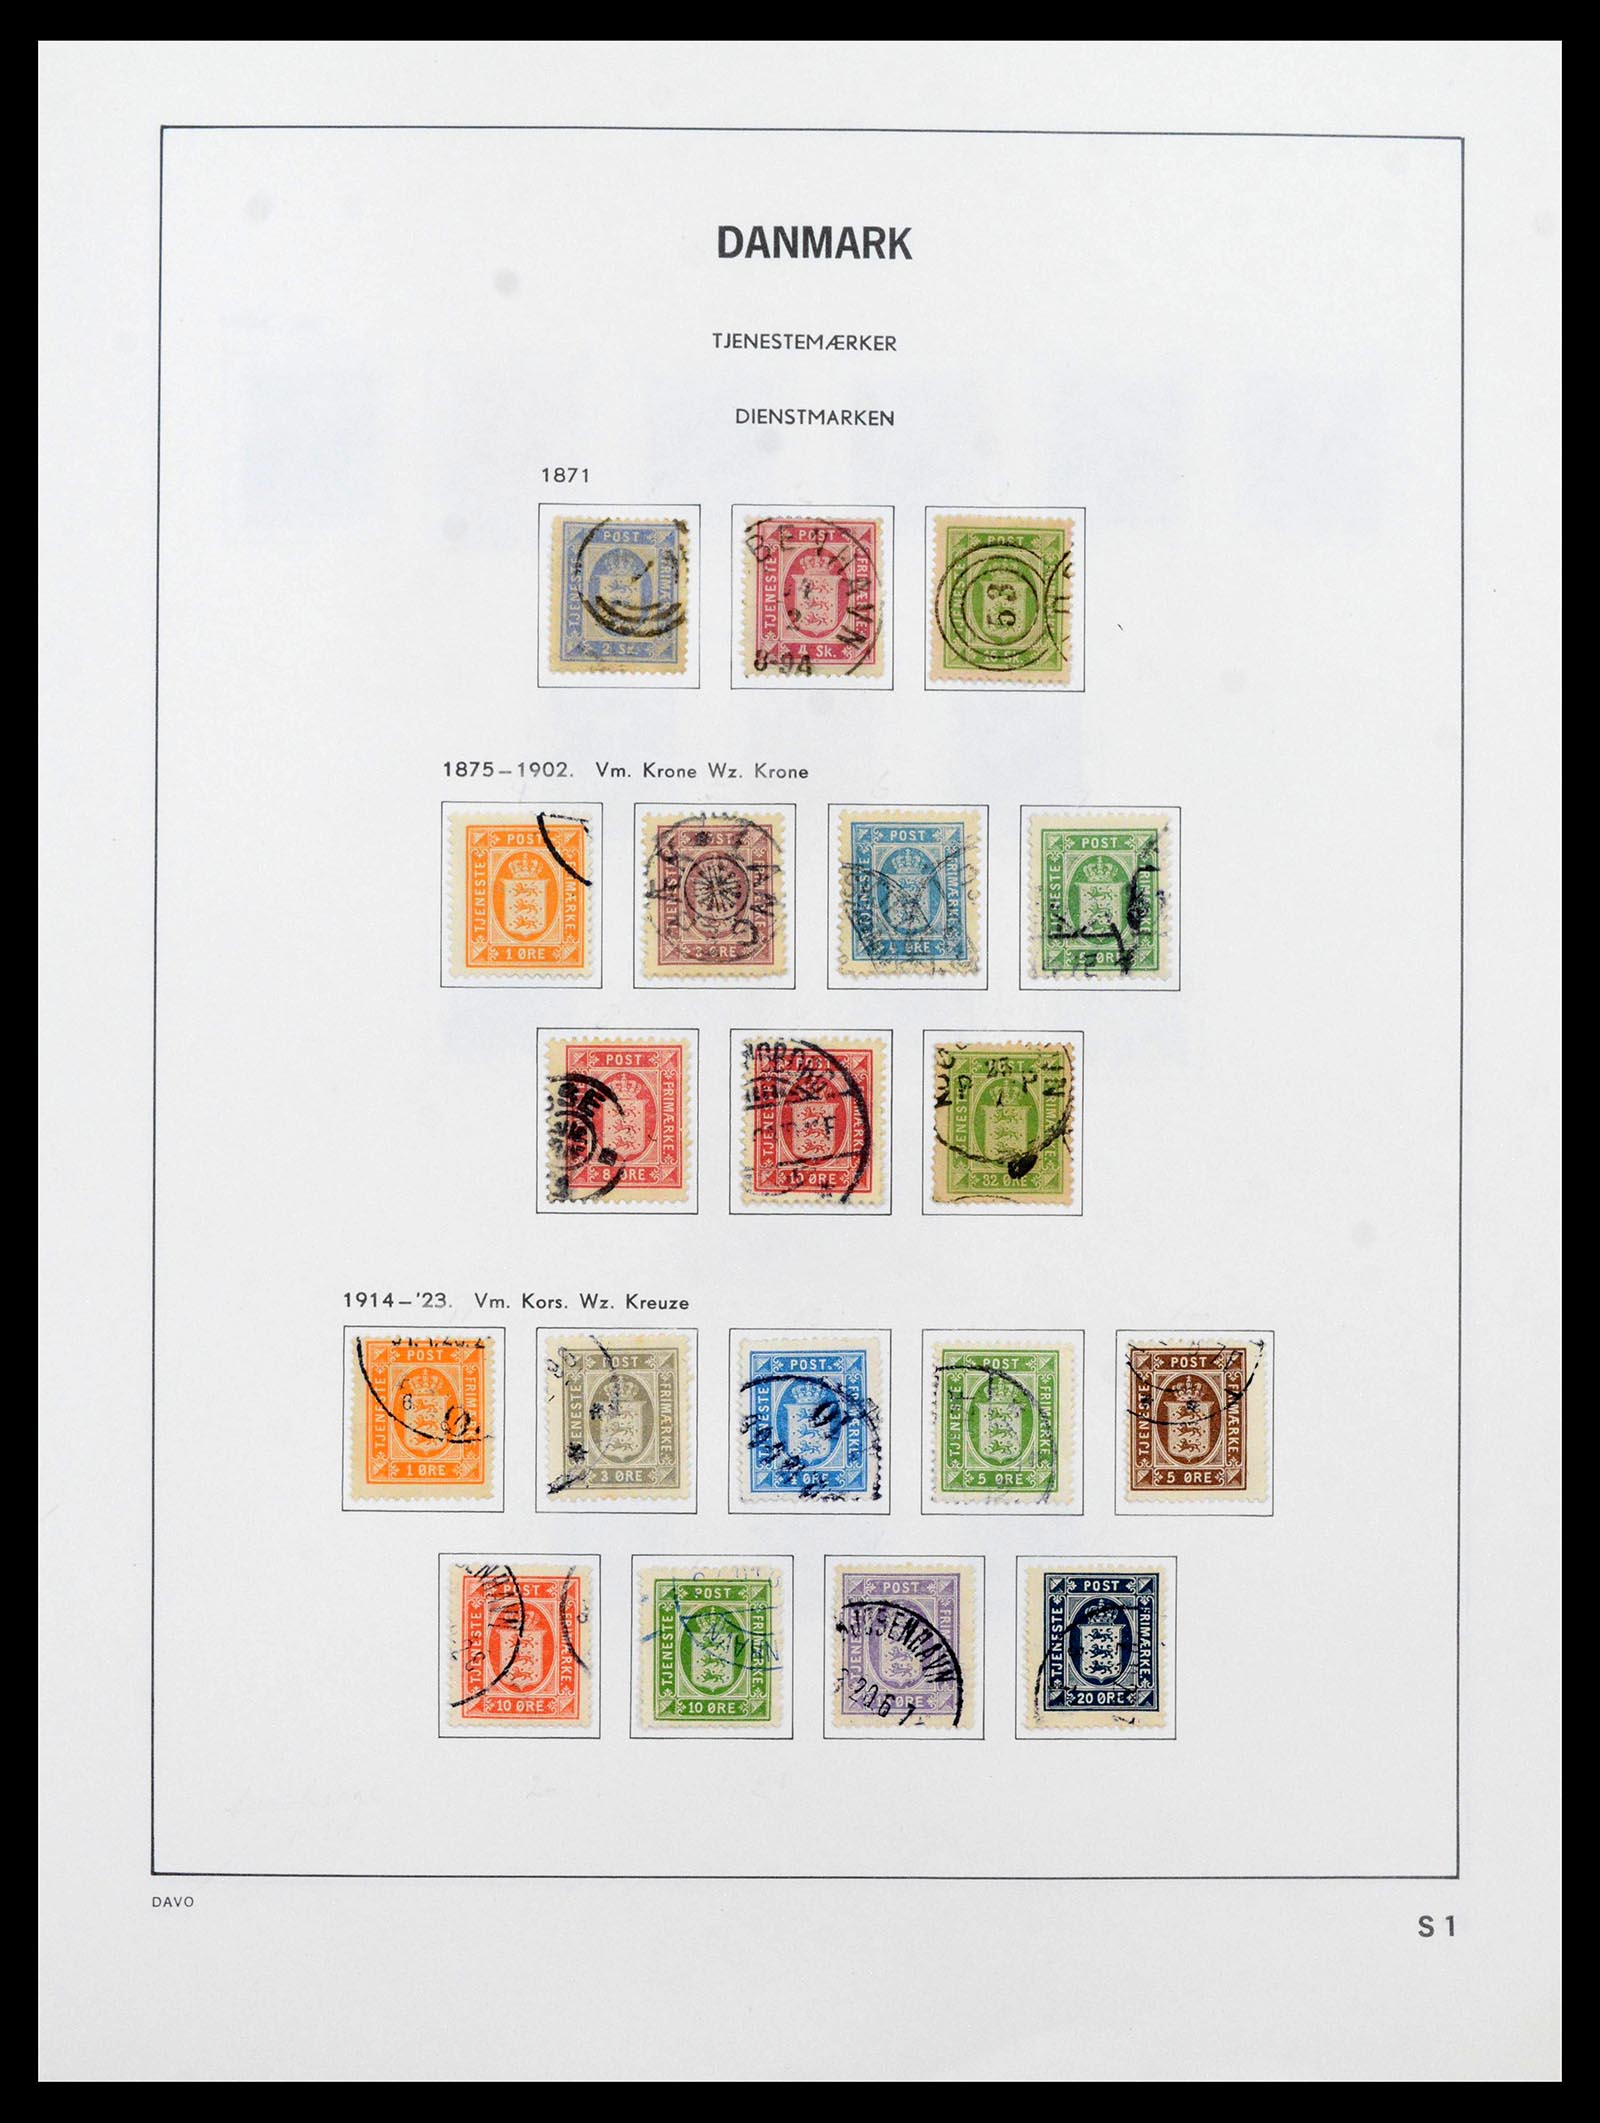 39428 0004 - Stamp collection 39428 Denmark 1851-2019.